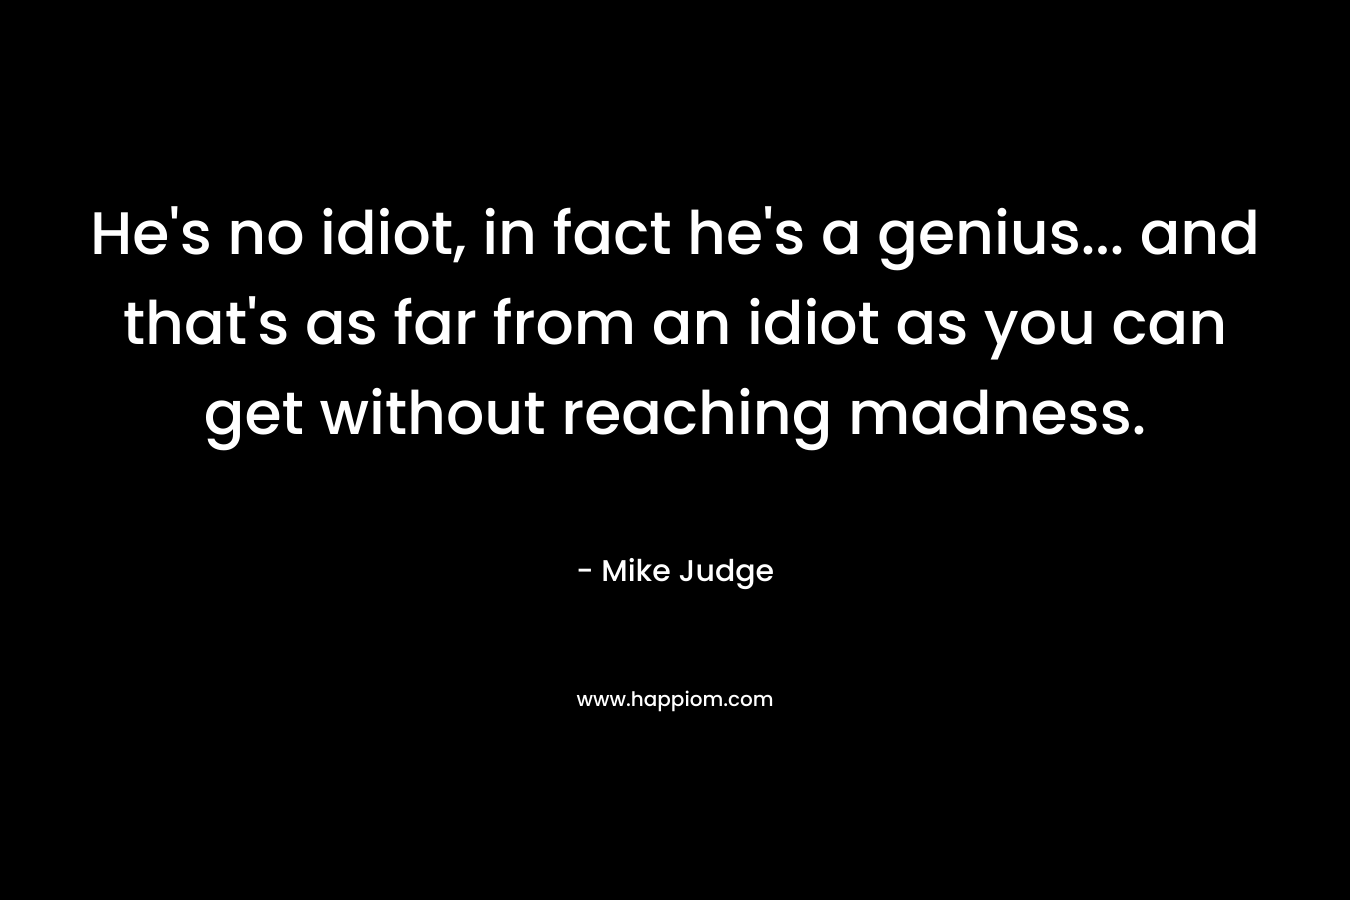 He’s no idiot, in fact he’s a genius… and that’s as far from an idiot as you can get without reaching madness. – Mike Judge